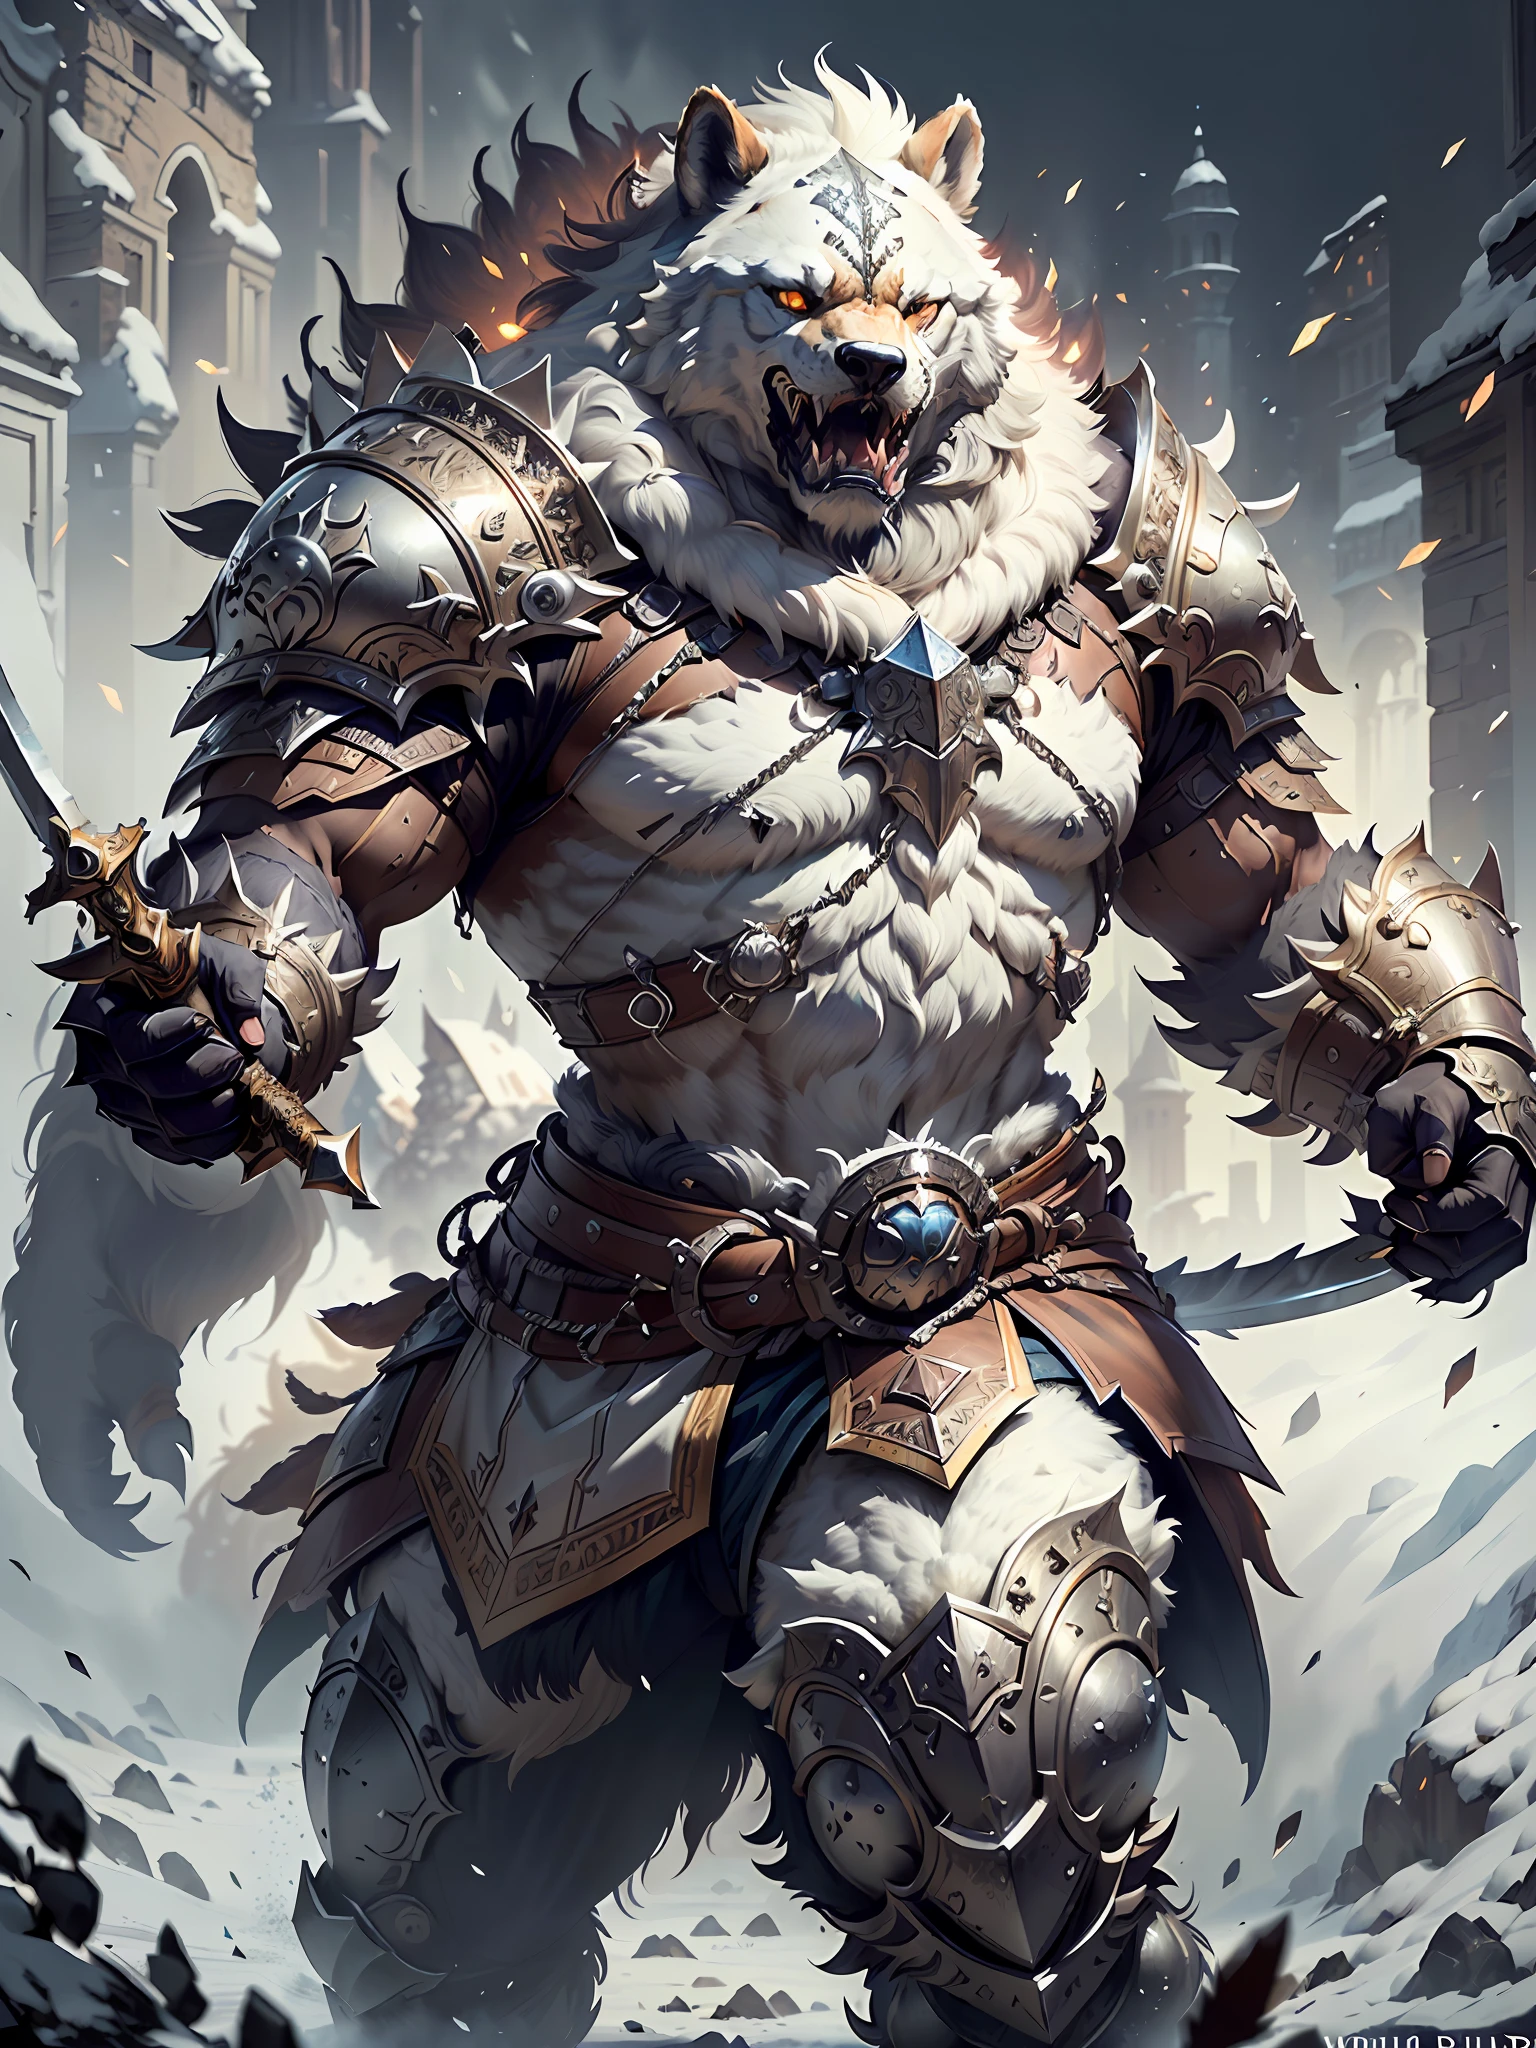 (A shield，White bear with sword and armor)， fur-clad barbarian goliath, fur armour, wearing intricate fur armor, (((Instantly roared))) intricate white armor, detailed white armor, wojtek fus, hyper-detailed fantasy character, wolf armor, Epic fantasy character art, furry fantasy art, god of winter, trends in art station